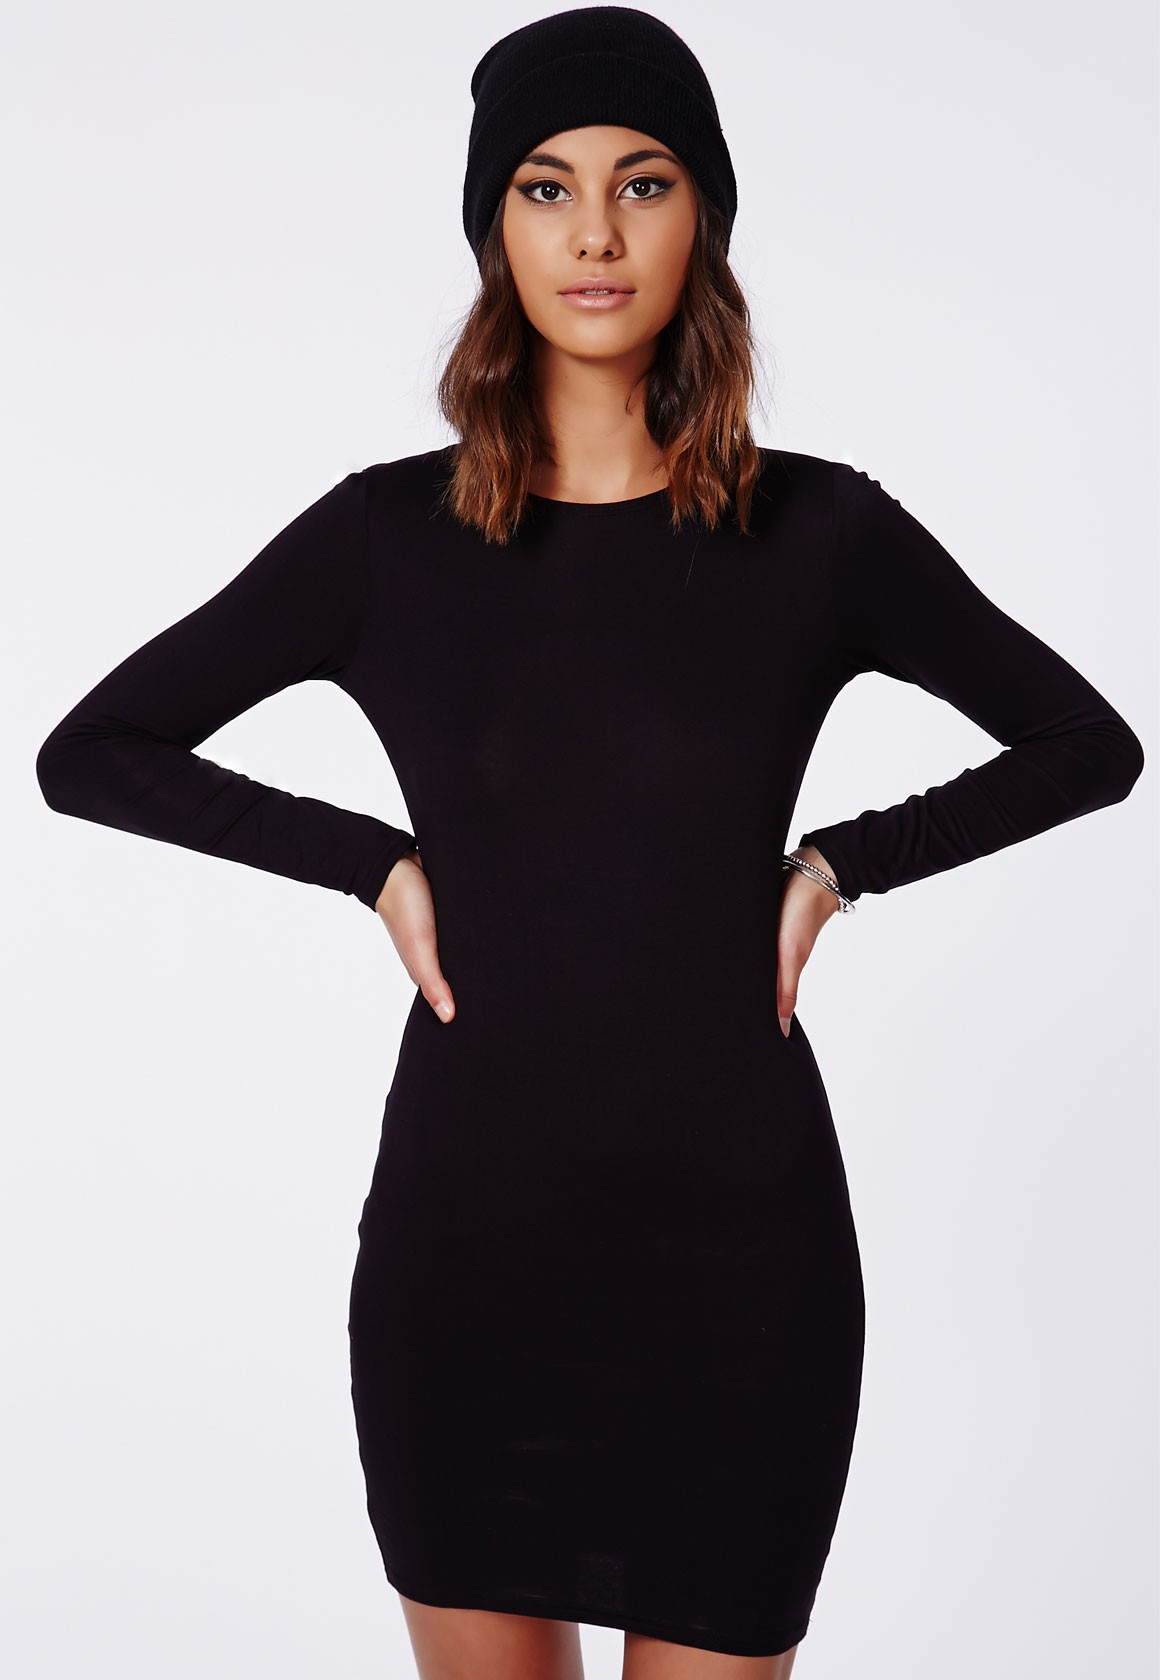 Black Jersey Dress With Sleeves : 2017 Fashion Trends